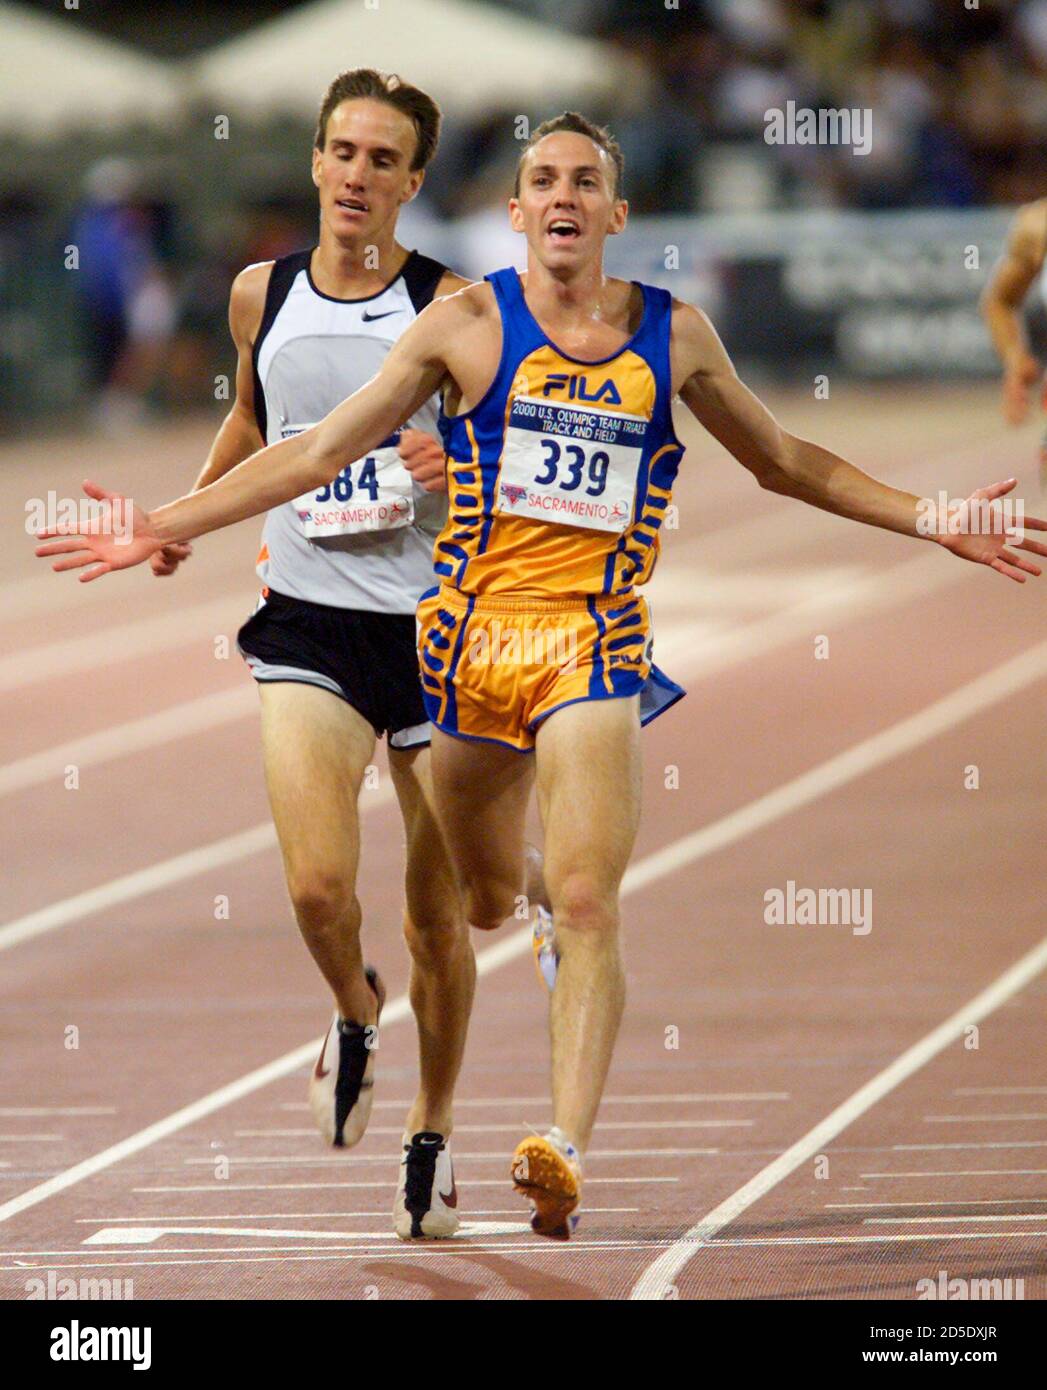 Adam Goucher(R) edges out Brad Hauser at the finish line to win the men's  5000m final at the U.S. Olympic Track and Field Trials in Sacramento July  21. Goucher won the race